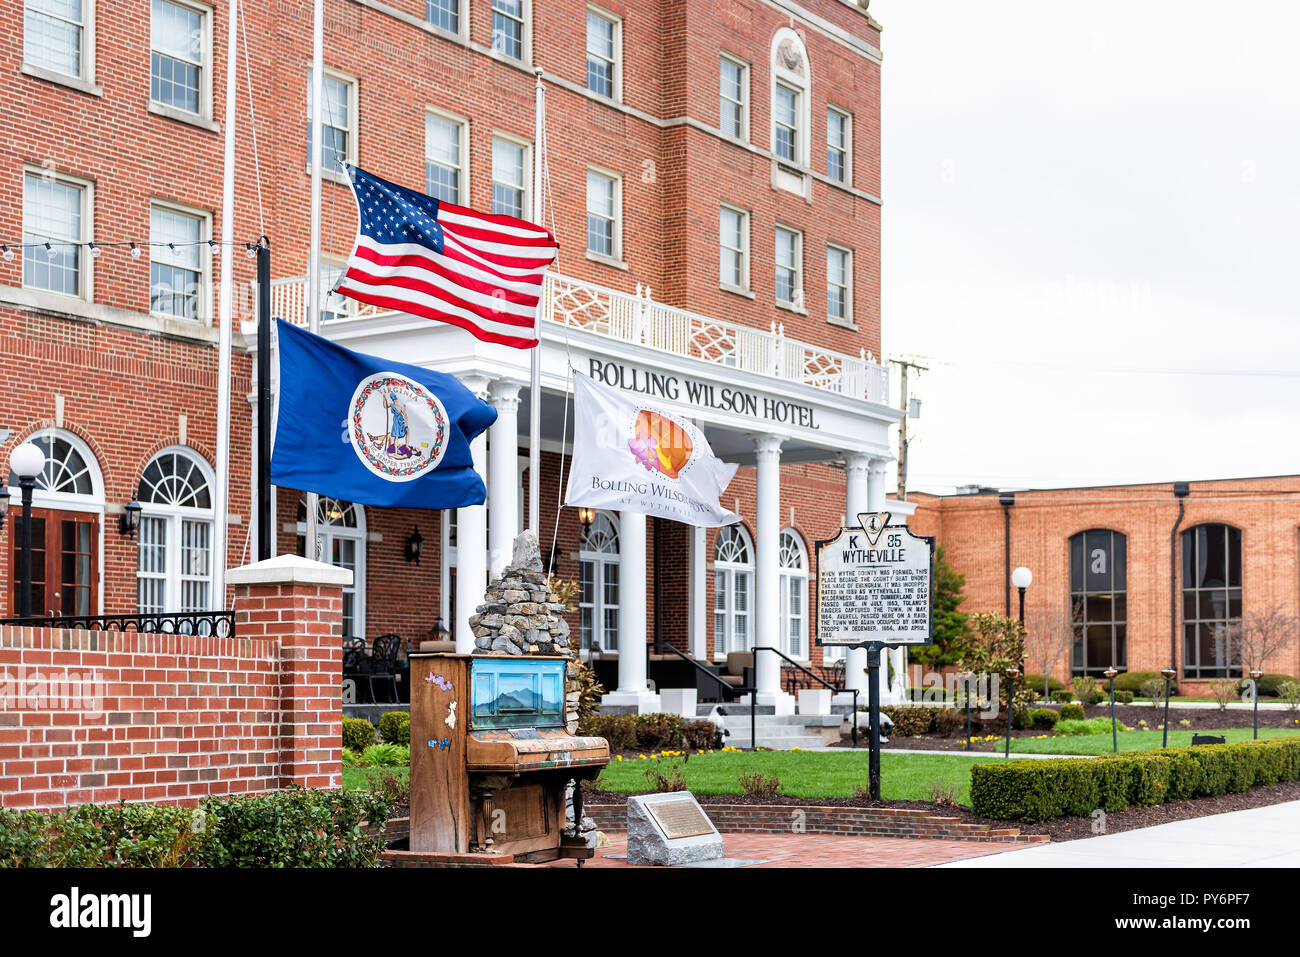 Wytheville, USA - April 19, 2018: Small town village signs flags for historic famous Bolling Wilson boutique hotel in southern south Virginia, histori Stock Photo